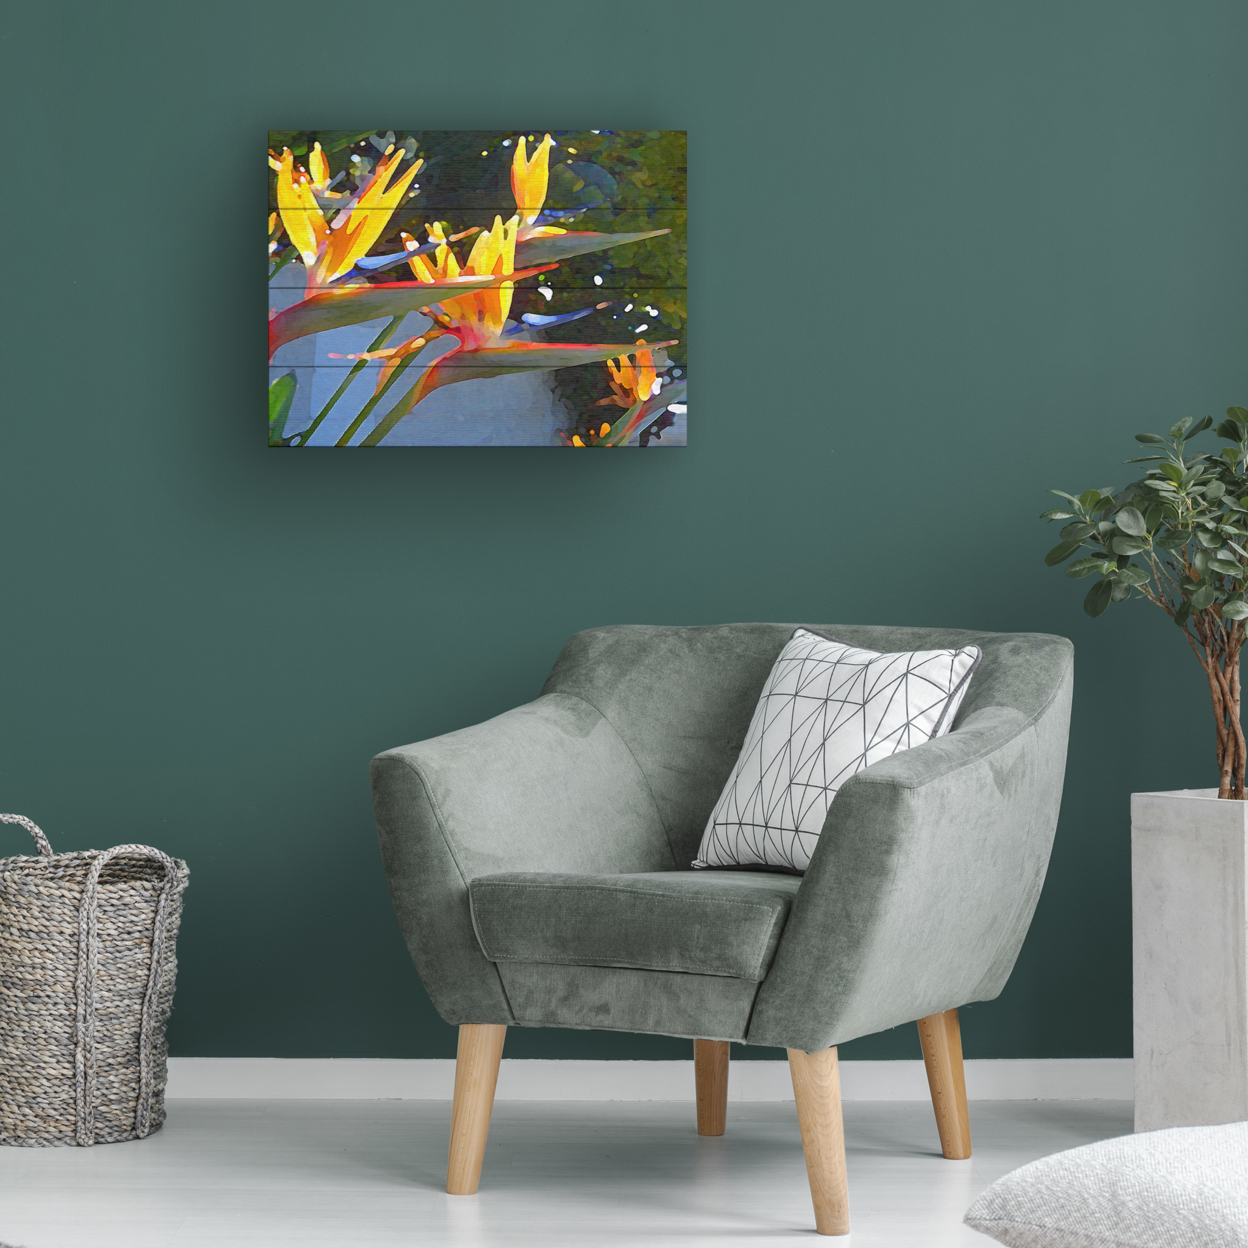 Wall Art 12 X 16 Inches Titled Bird Of Paradise Backlit By Sun Ready To Hang Printed On Wooden Planks